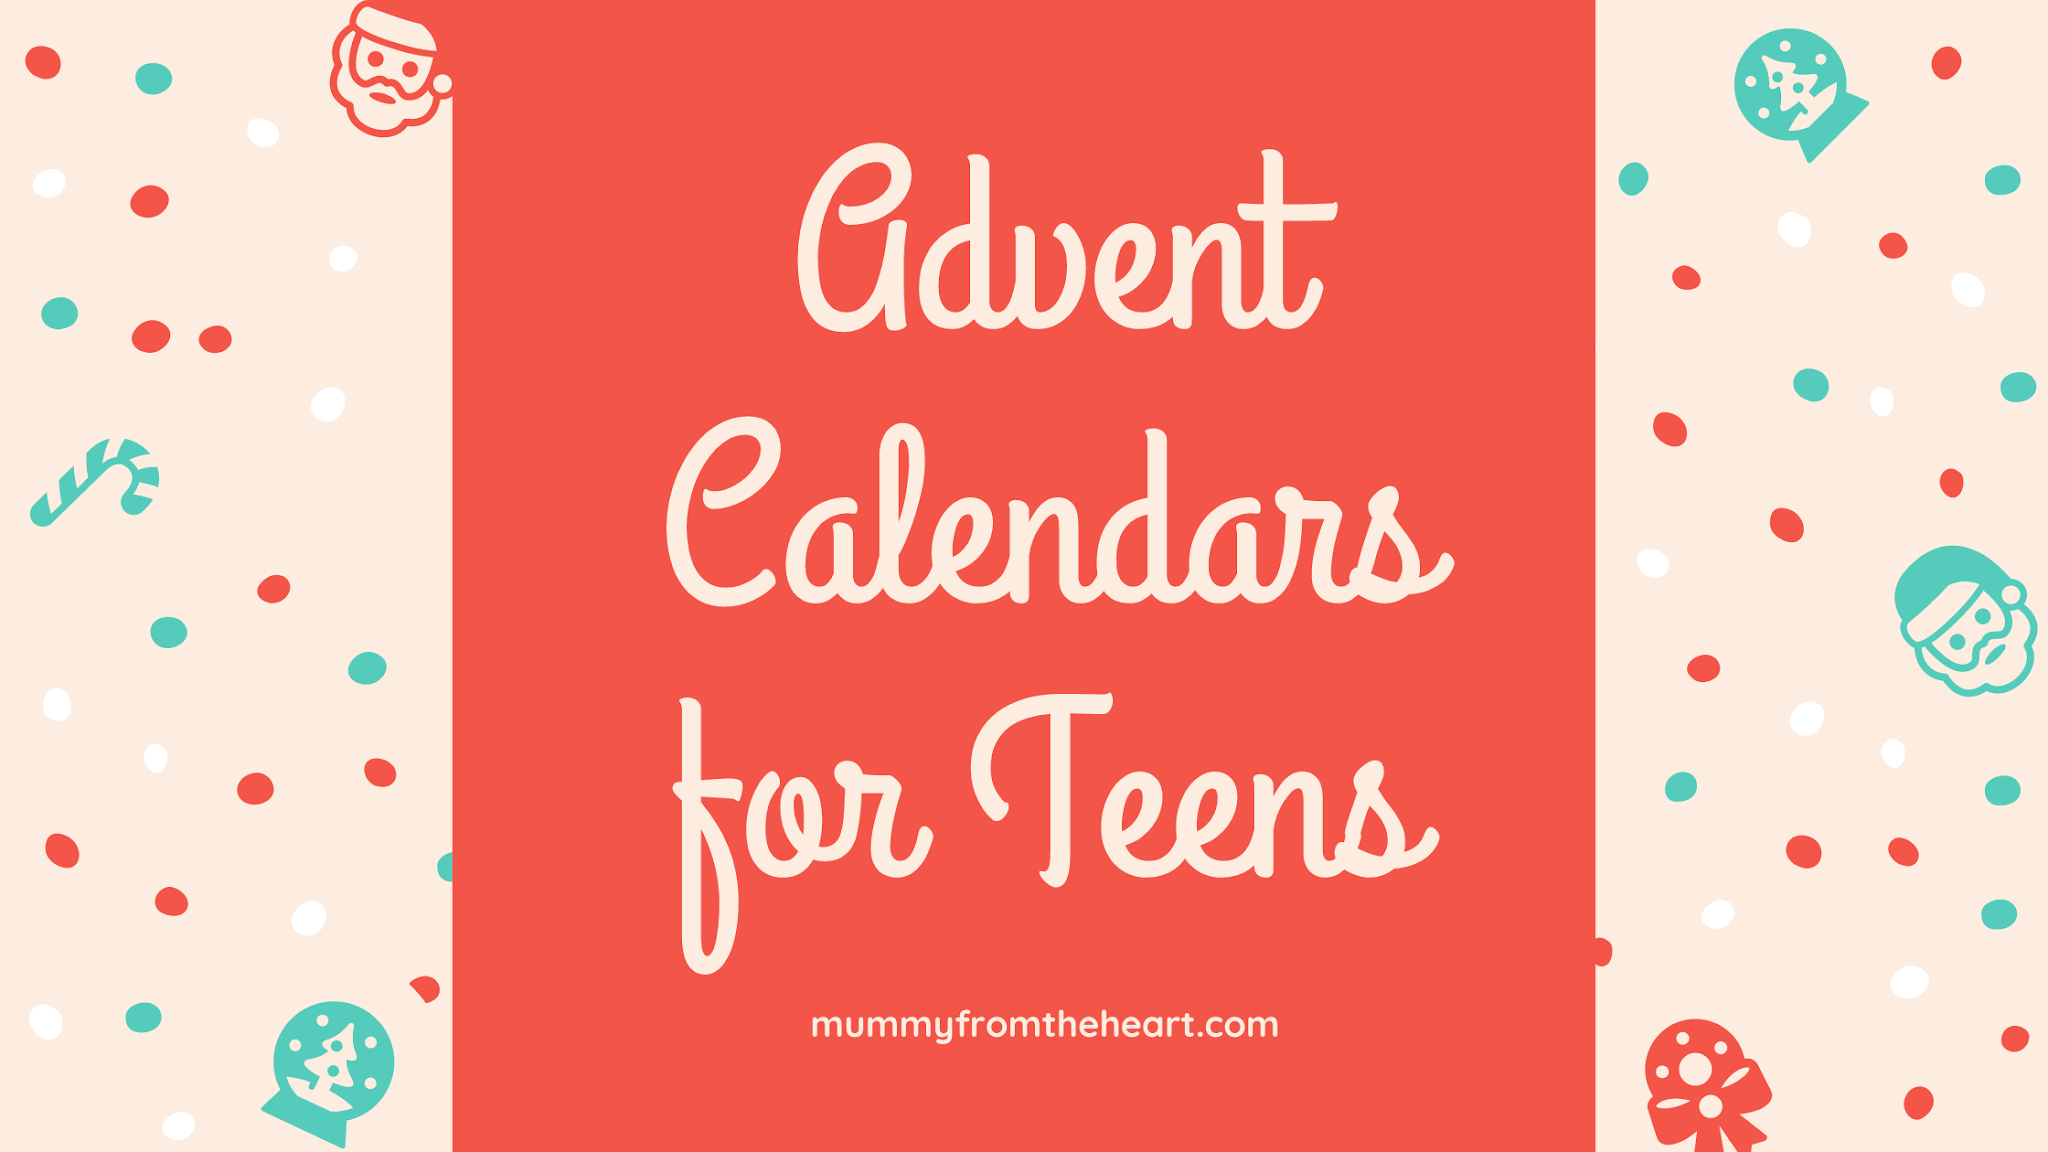 Mummy From The Heart: Great Advent Calendar Suggestions for Teens in 2020